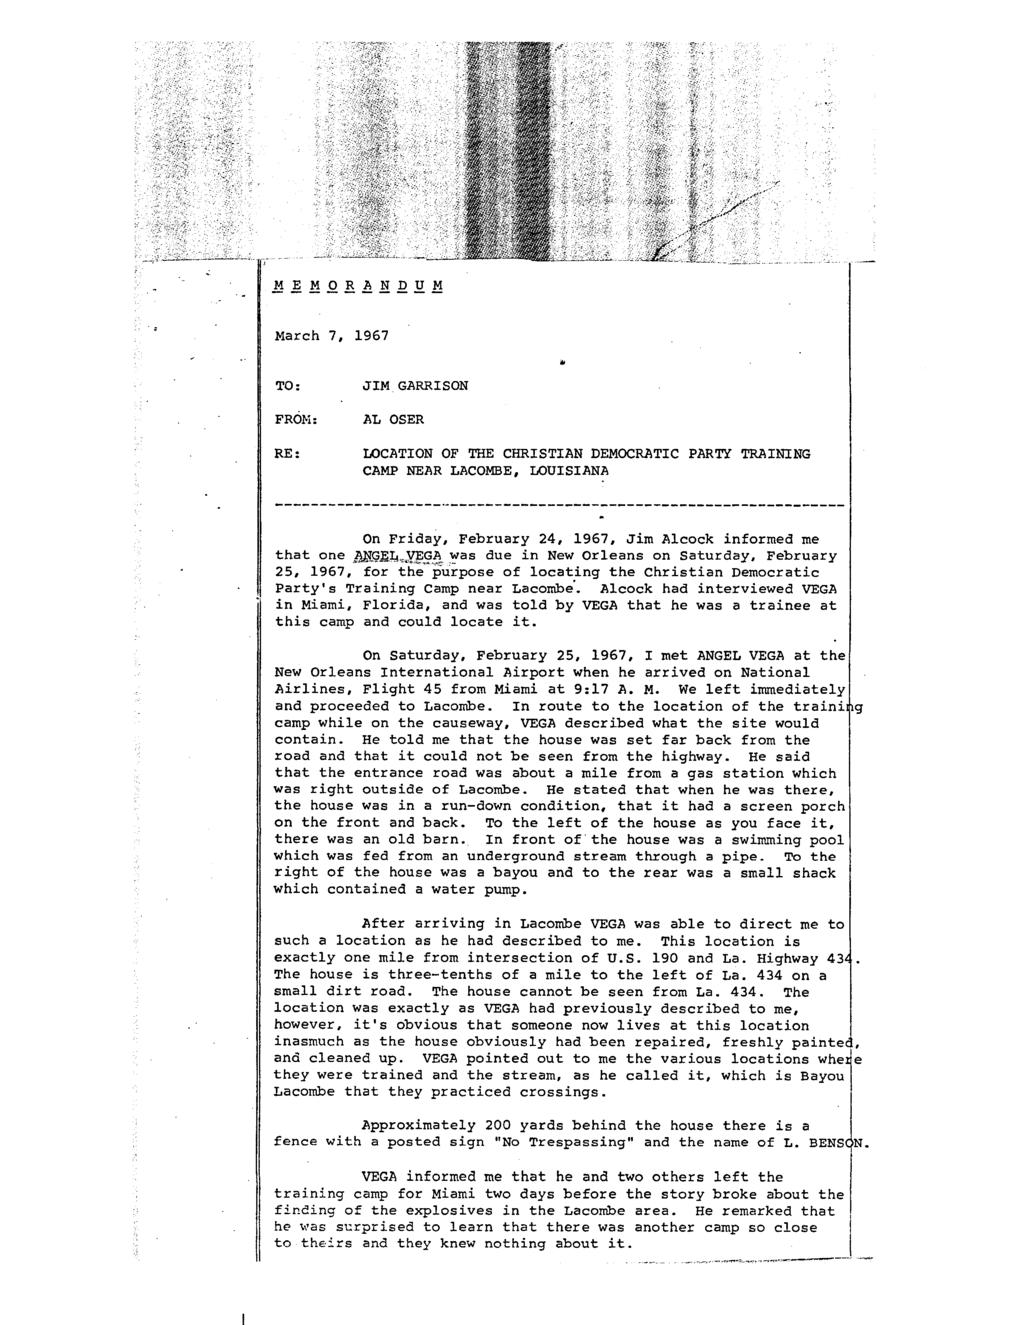 MEMORANDUM March 7, 1967 TO: FROM: RE: JIM GARRISON AL OSER LOCATION OF THE CHRISTIAN DEMOCRATIC PARTY TRAINING CAMP NEAR LACOMBE, LOUISIANA On Friday, February 24, 1967, Jim Alcock informed me that